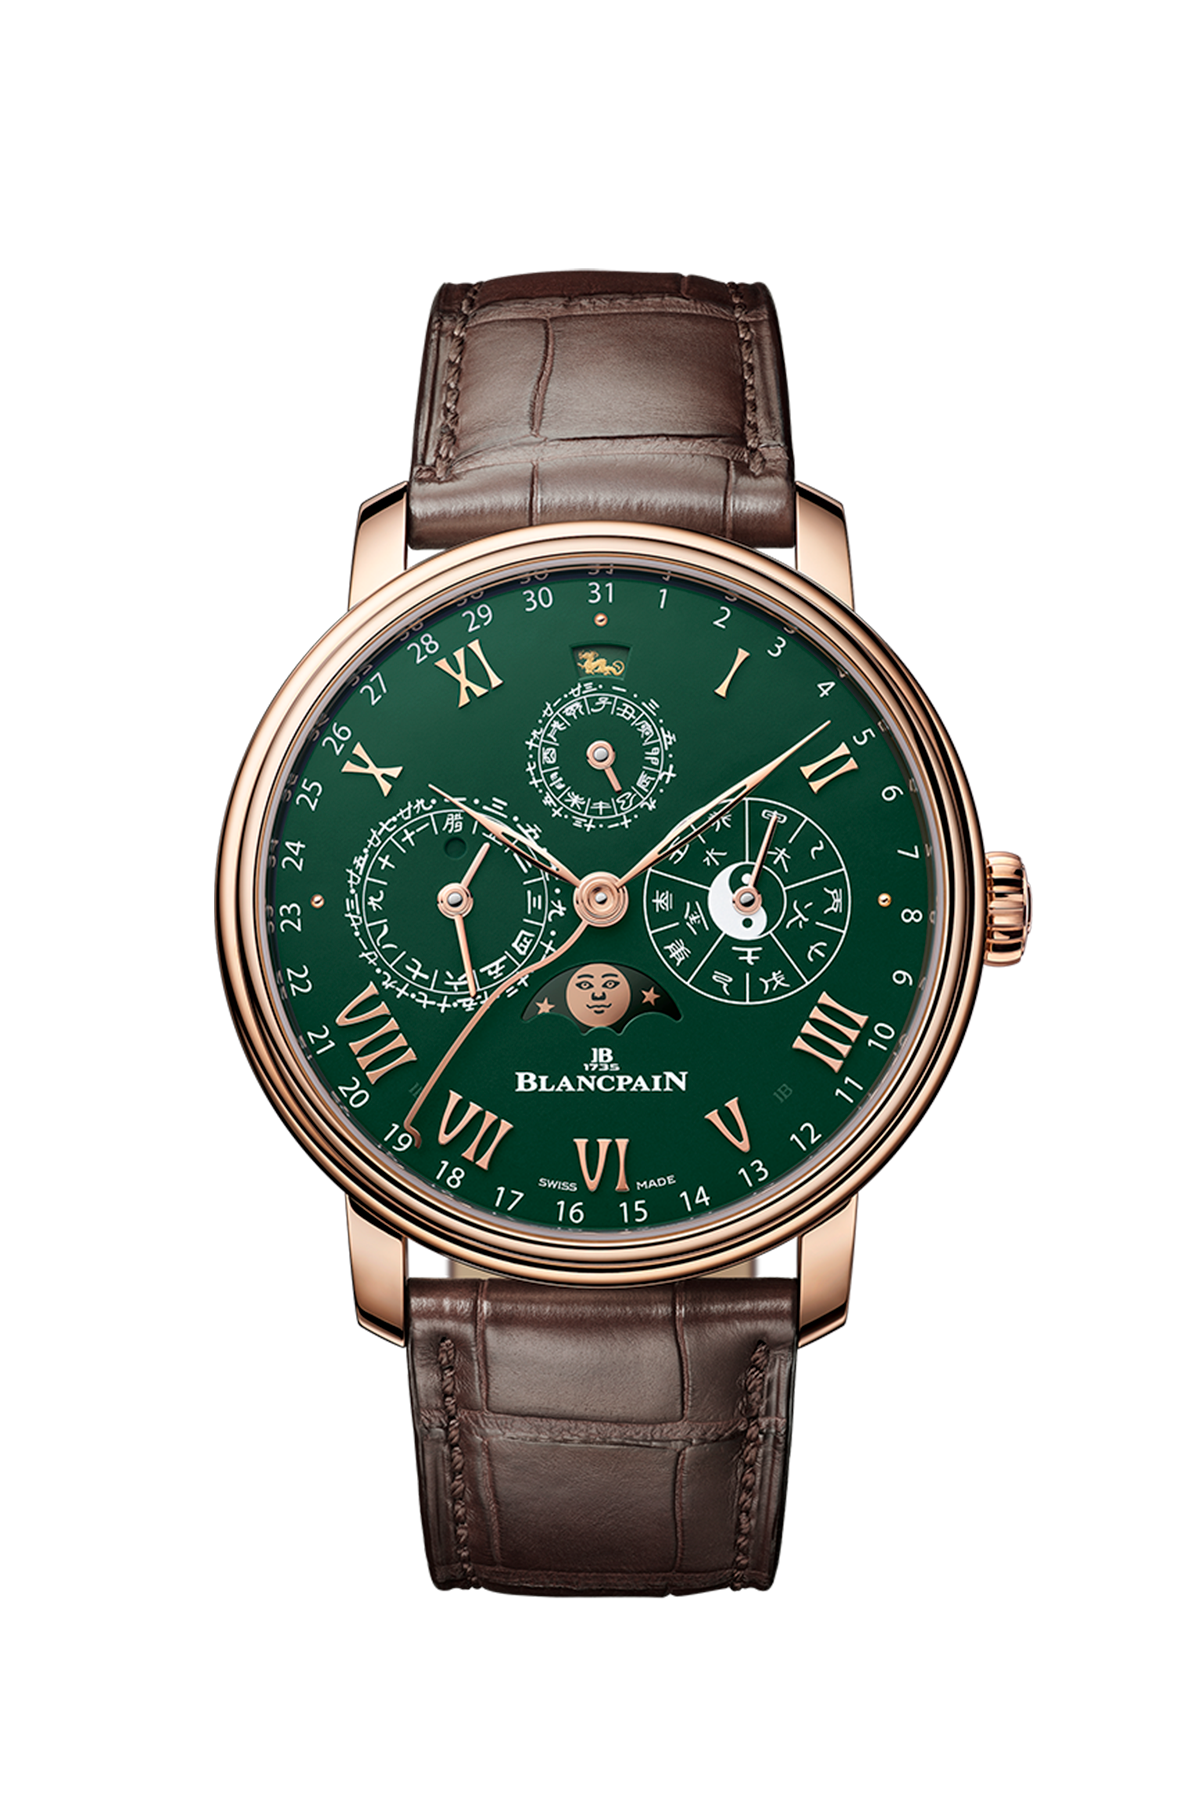 Blancpain Calendrier Chinois Traditionnel - 00888 3632C 55B